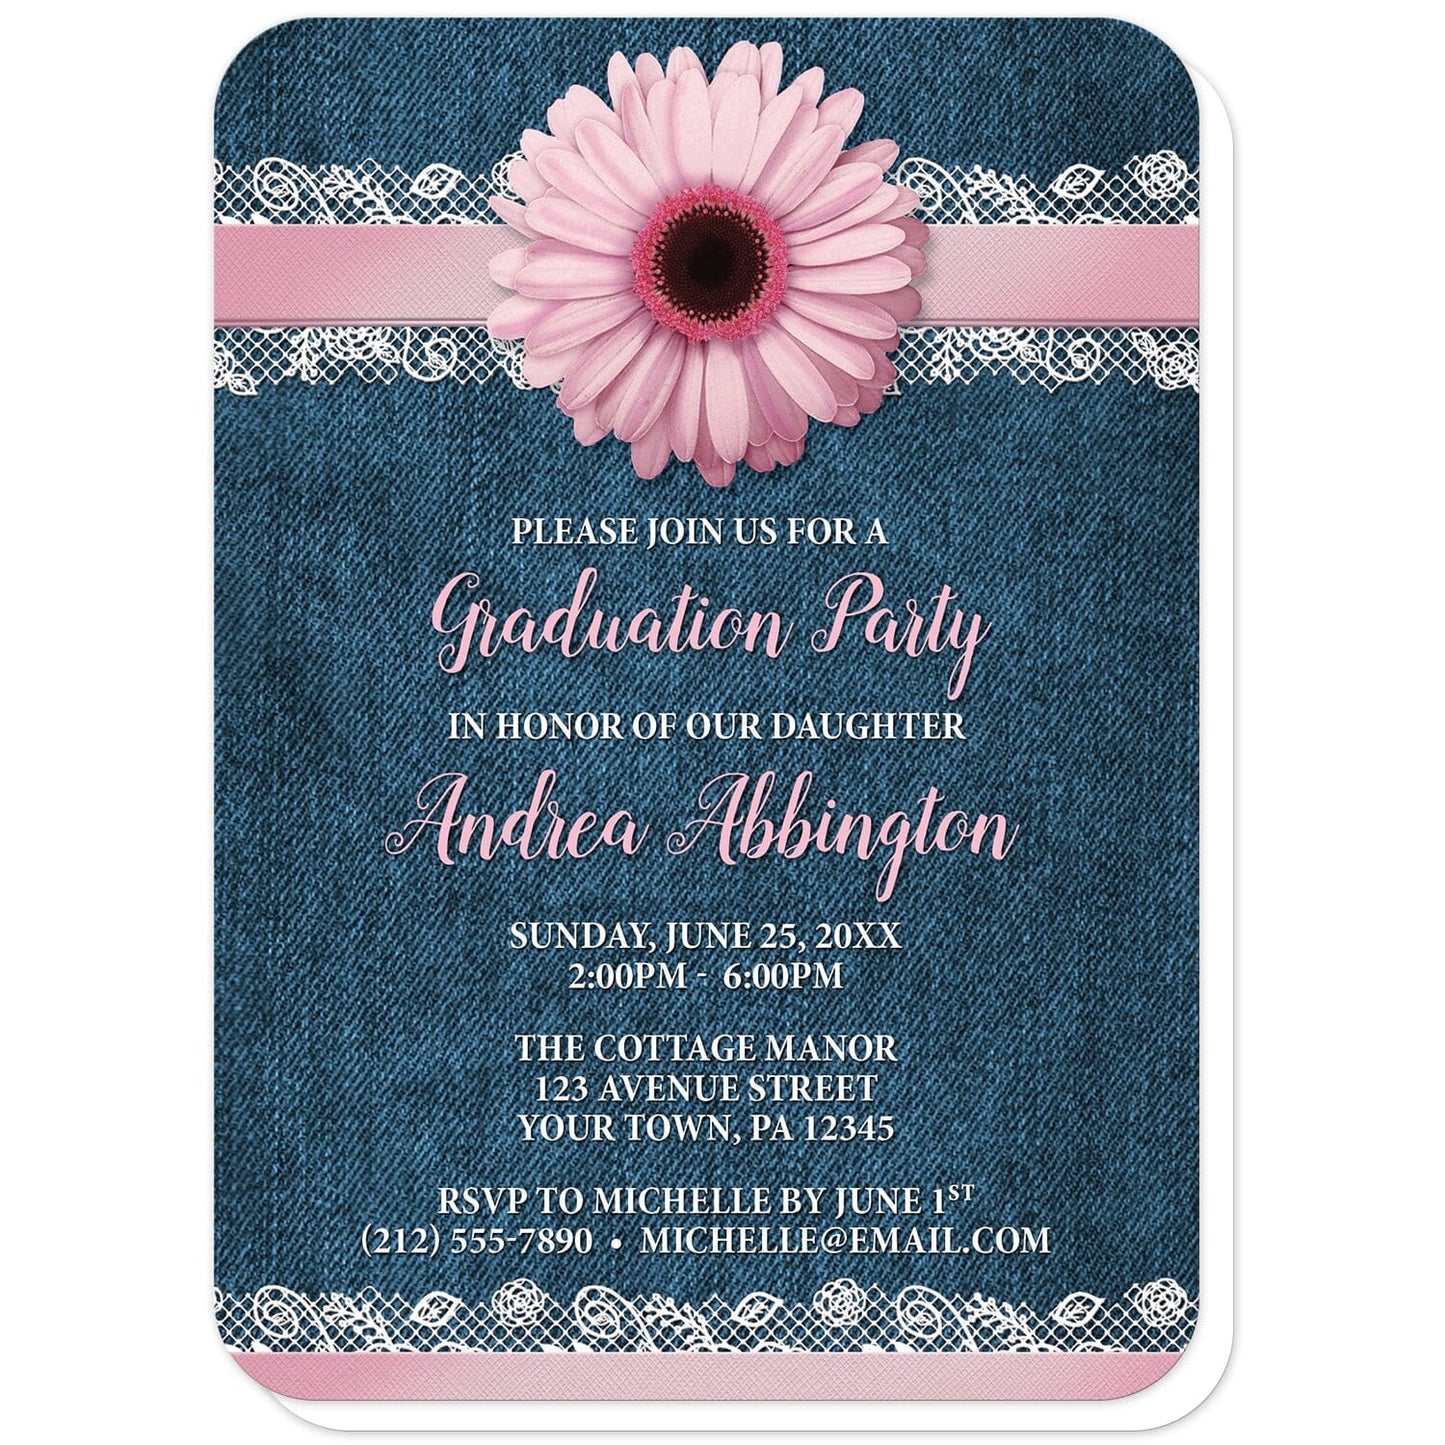 Pink Daisy Lace Rustic Denim Graduation Invitations (with rounded corners) at Artistically Invited. Southern-inspired pink daisy lace rustic denim graduation invitations with a pink daisy flower image centered at the top on a pink and white lace ribbon illustration. Your personalized graduation party details are custom printed in pink and white over a country blue denim background.